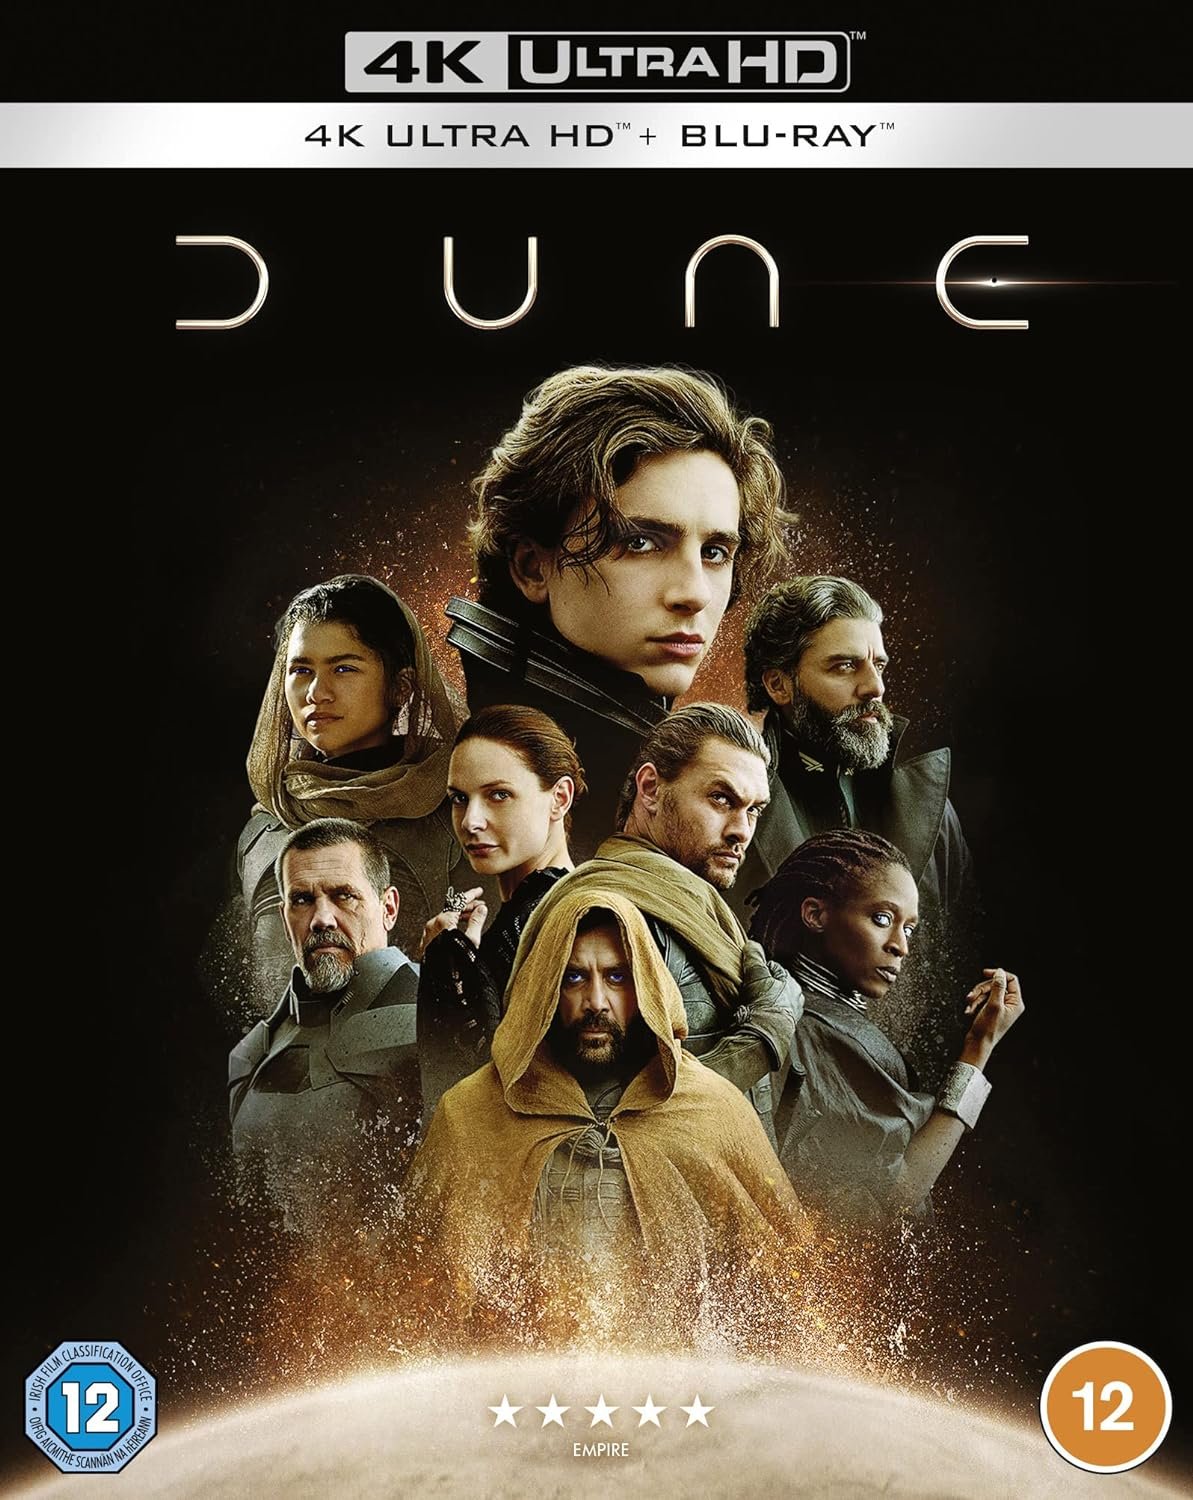 Cover of the "Dune" 4K Ultra HD Blu-ray Format: Blu-ray featuring a montage of key characters, including Paul Atreides, from the film set against a cosmic backdrop, with the title prominently